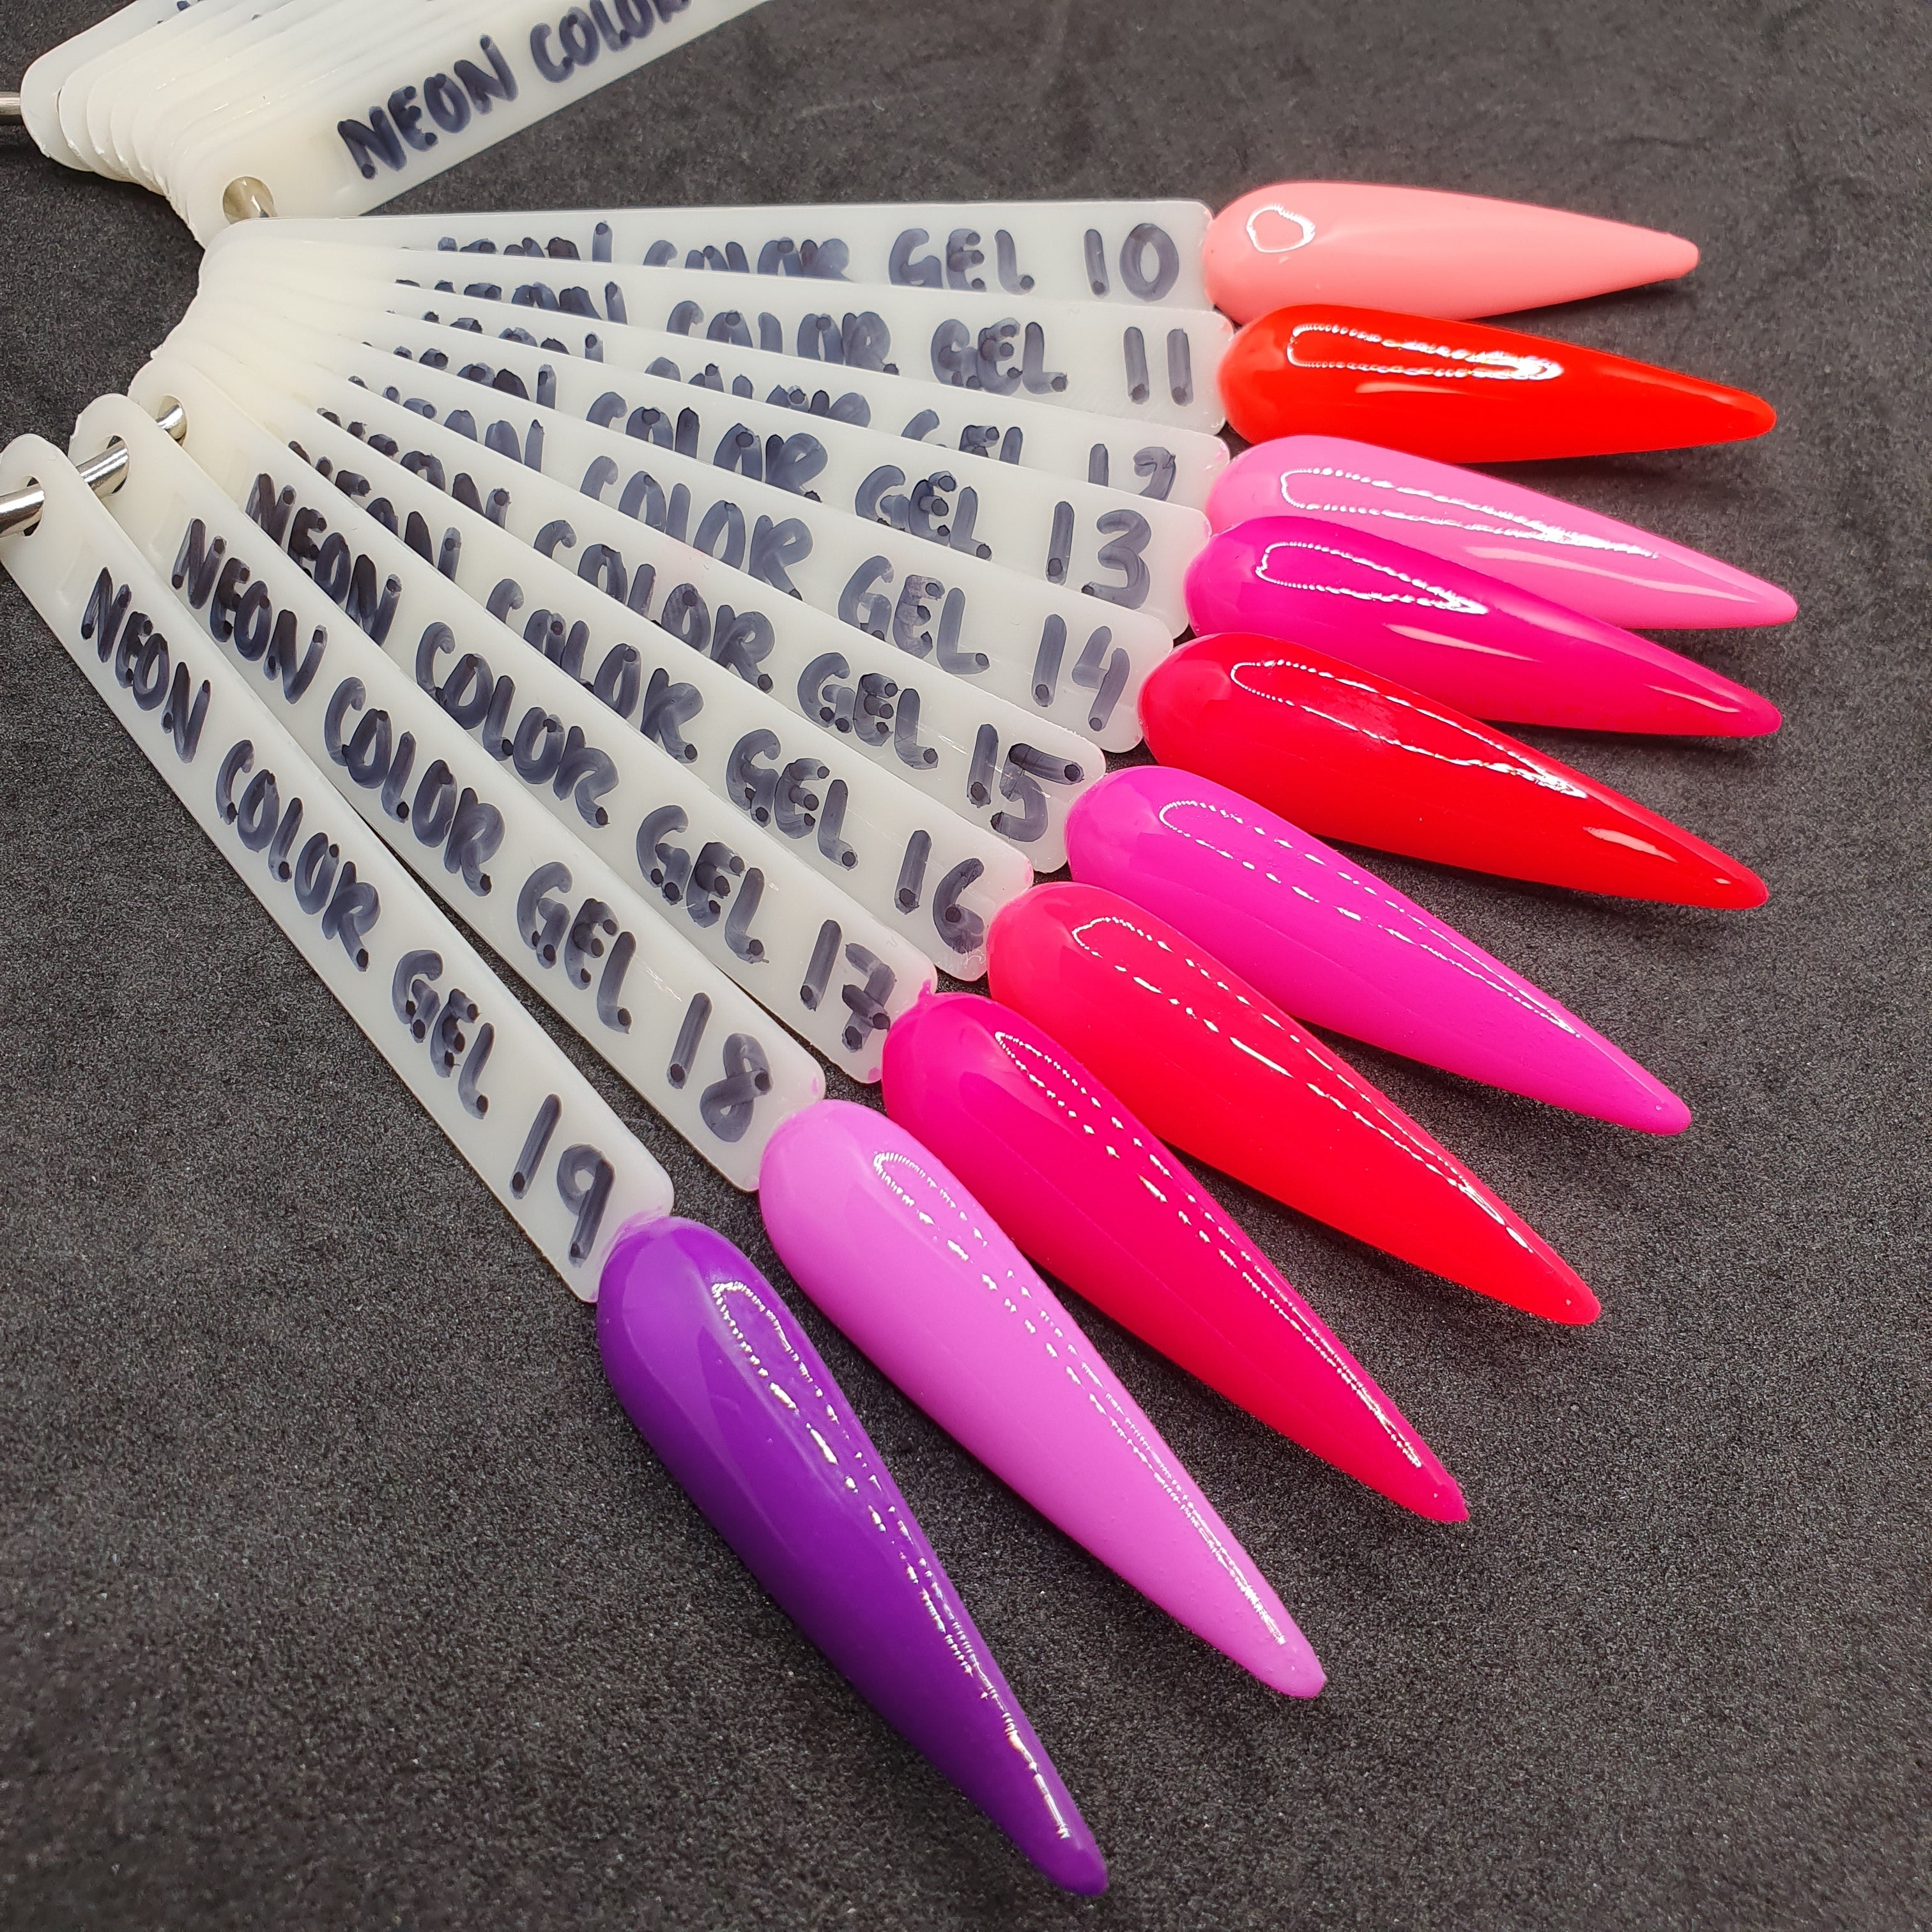 NEW - GND NEON GEL COLOR - 17